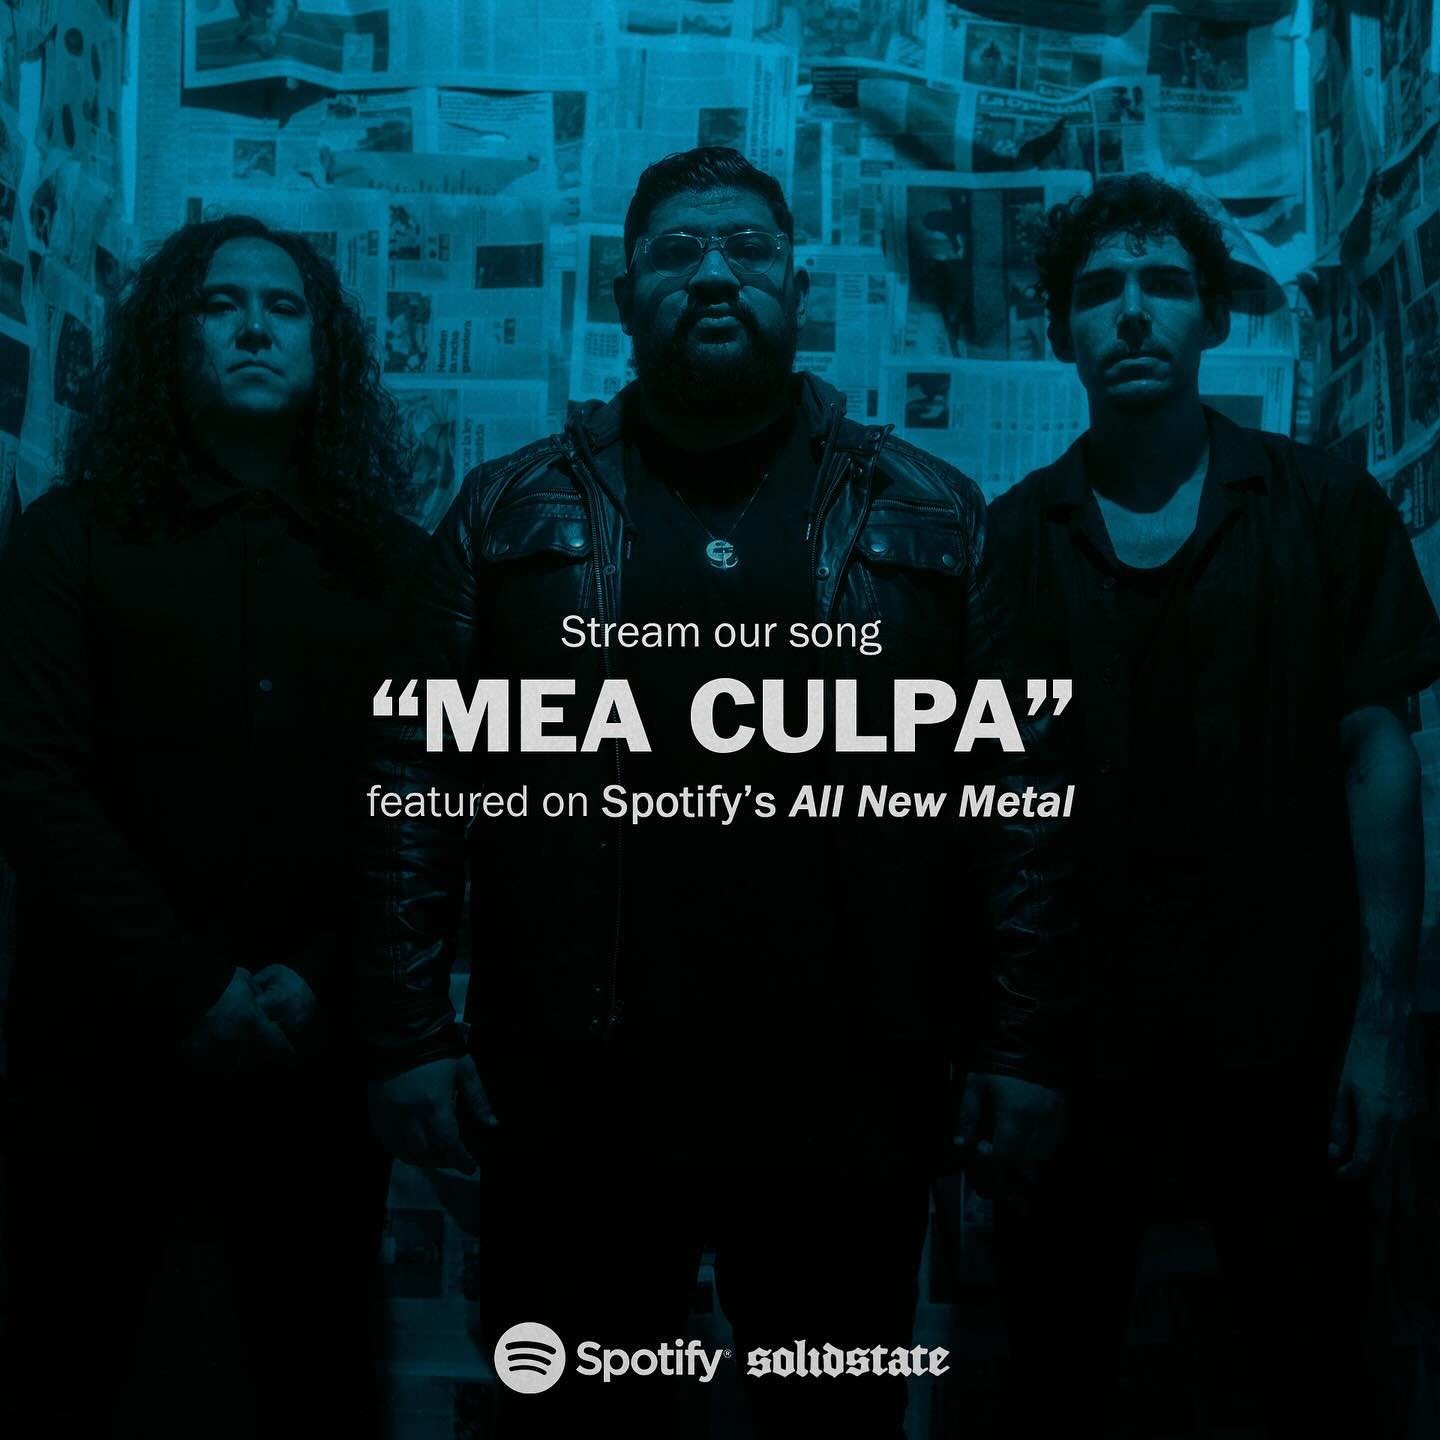 Big thank you to @spotify, @applemusic, and @tidal for the playlist love!  Stream our songs &ldquo;Mea Culpa&rdquo; and &ldquo;A Bastard&rsquo;s Shame&rdquo; on these stacked playlists 🔥

🎵 Spotify&rsquo;s #AllNewMetal
🎵 Apple Music&rsquo;s #Break